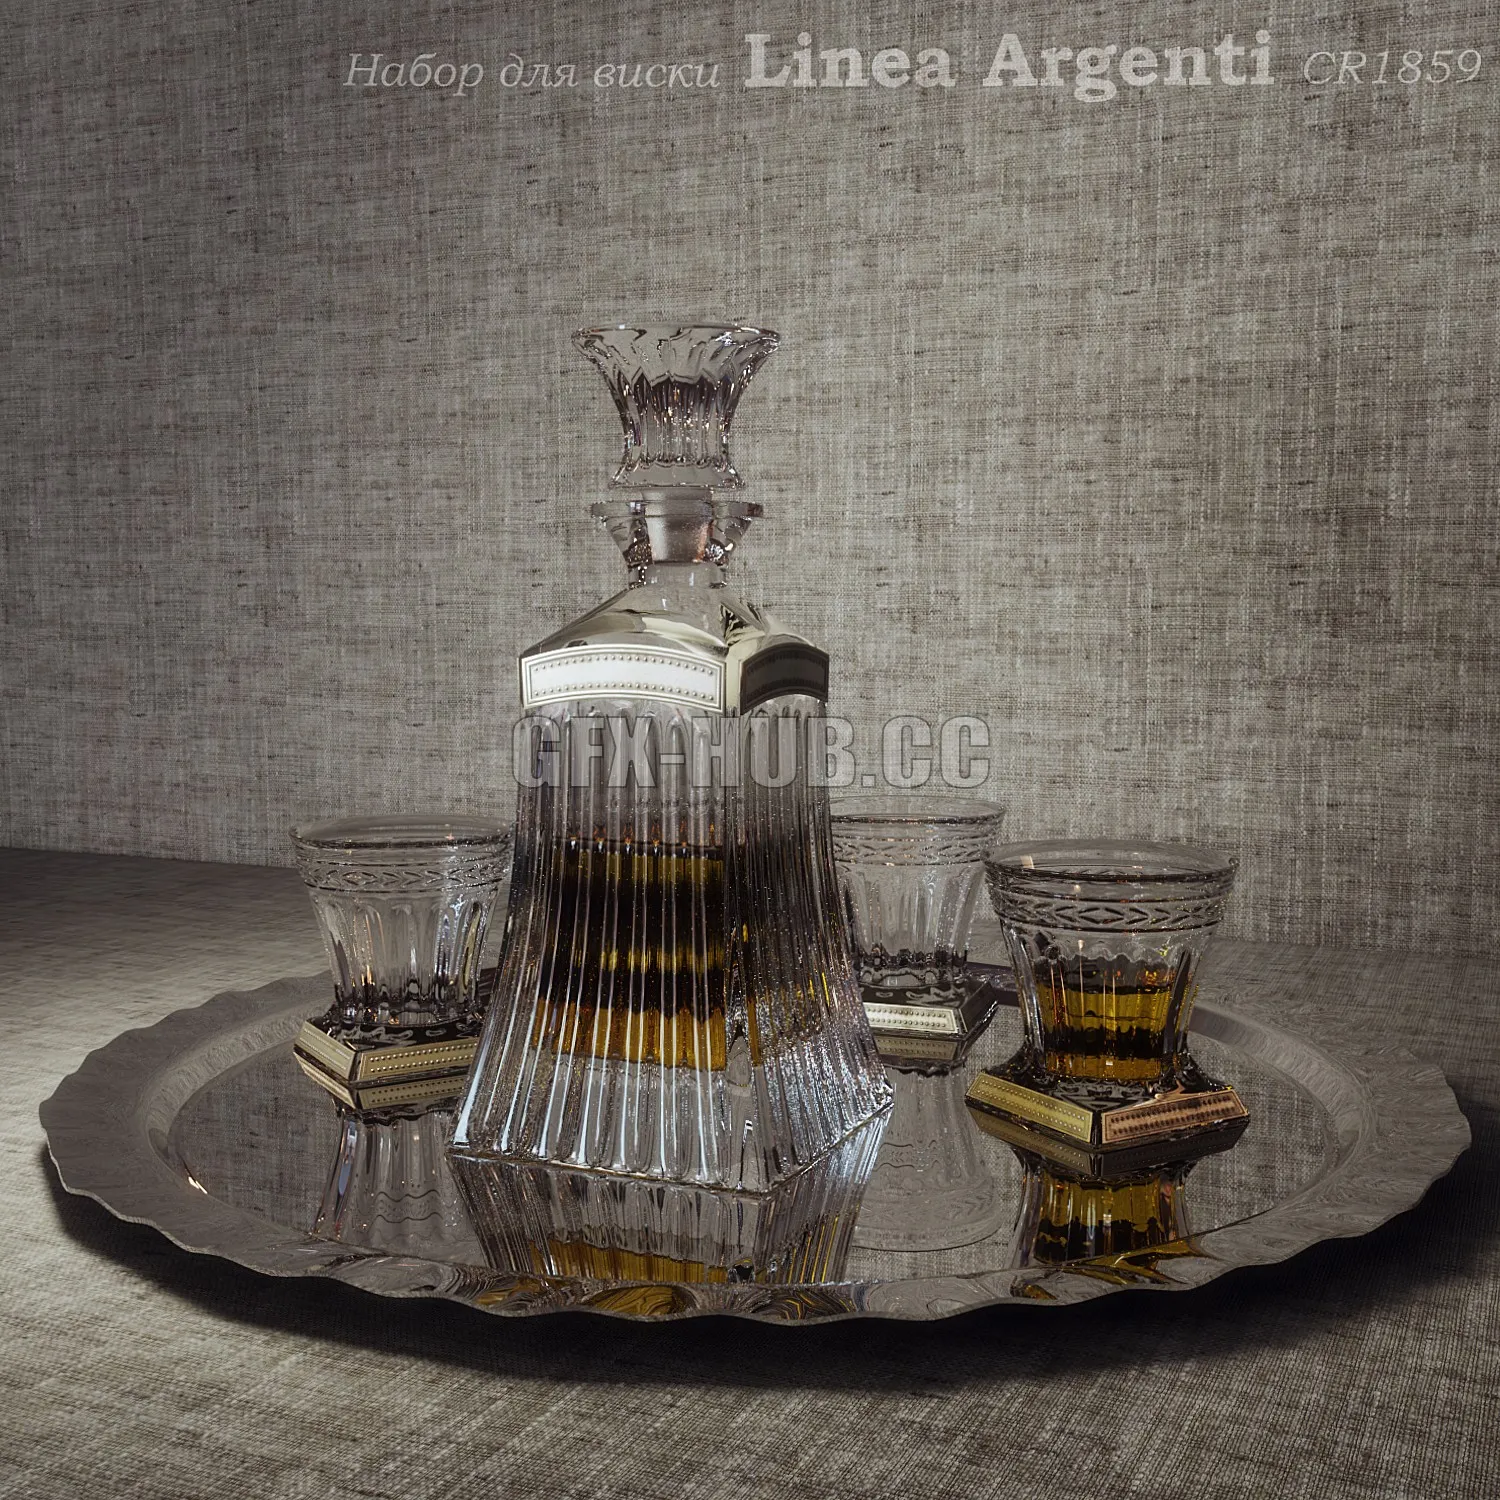 PRO MODELS – Set for whiskey Linea Argenti CR1859